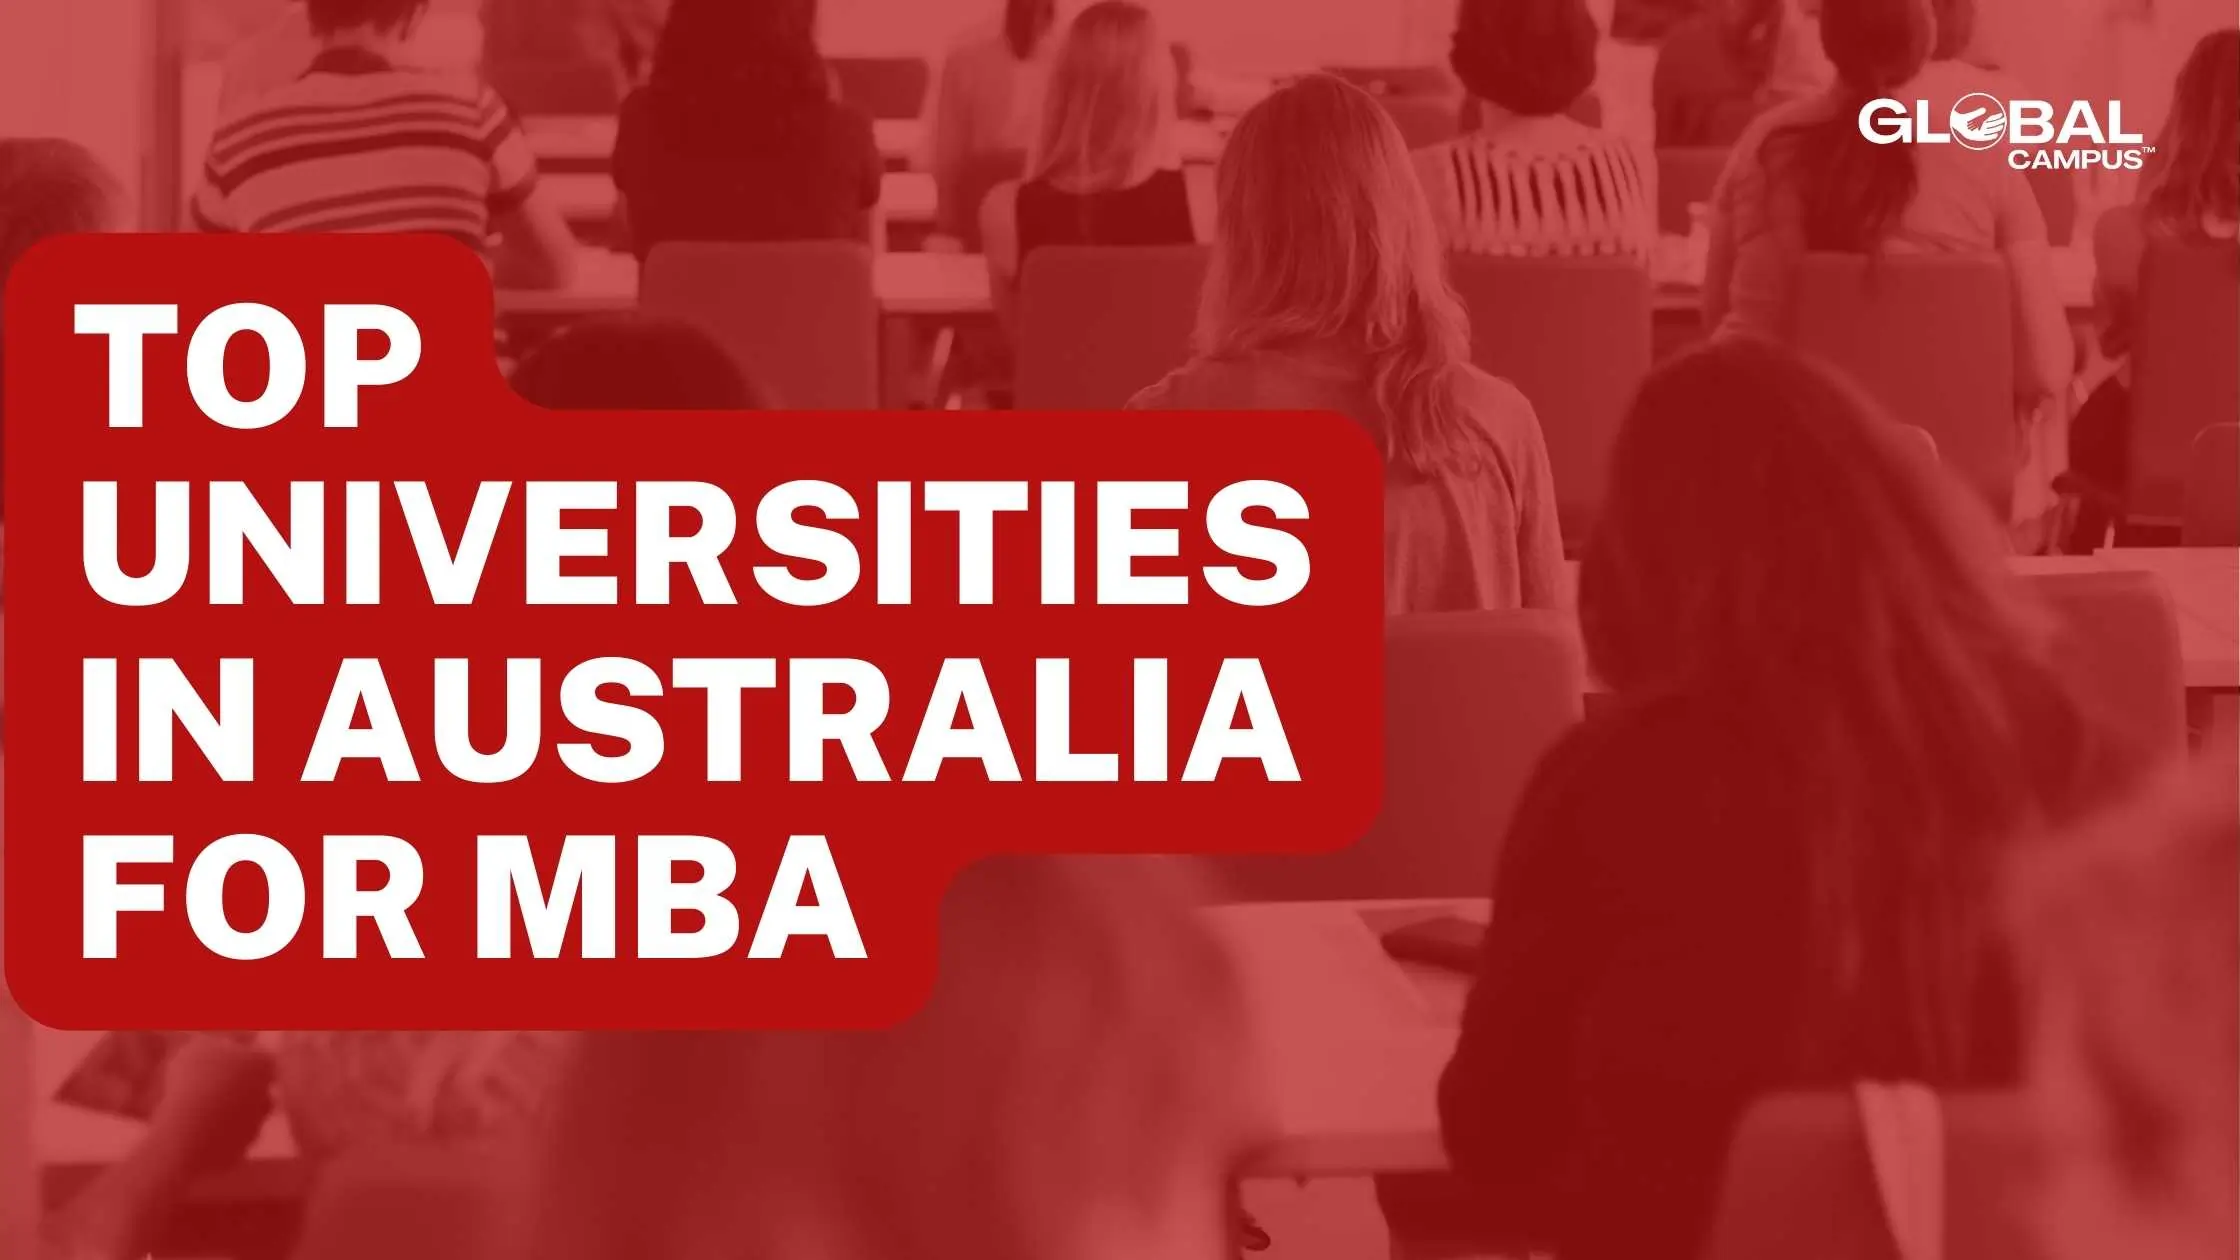 Students studying MBA from Top Universities in Australia.